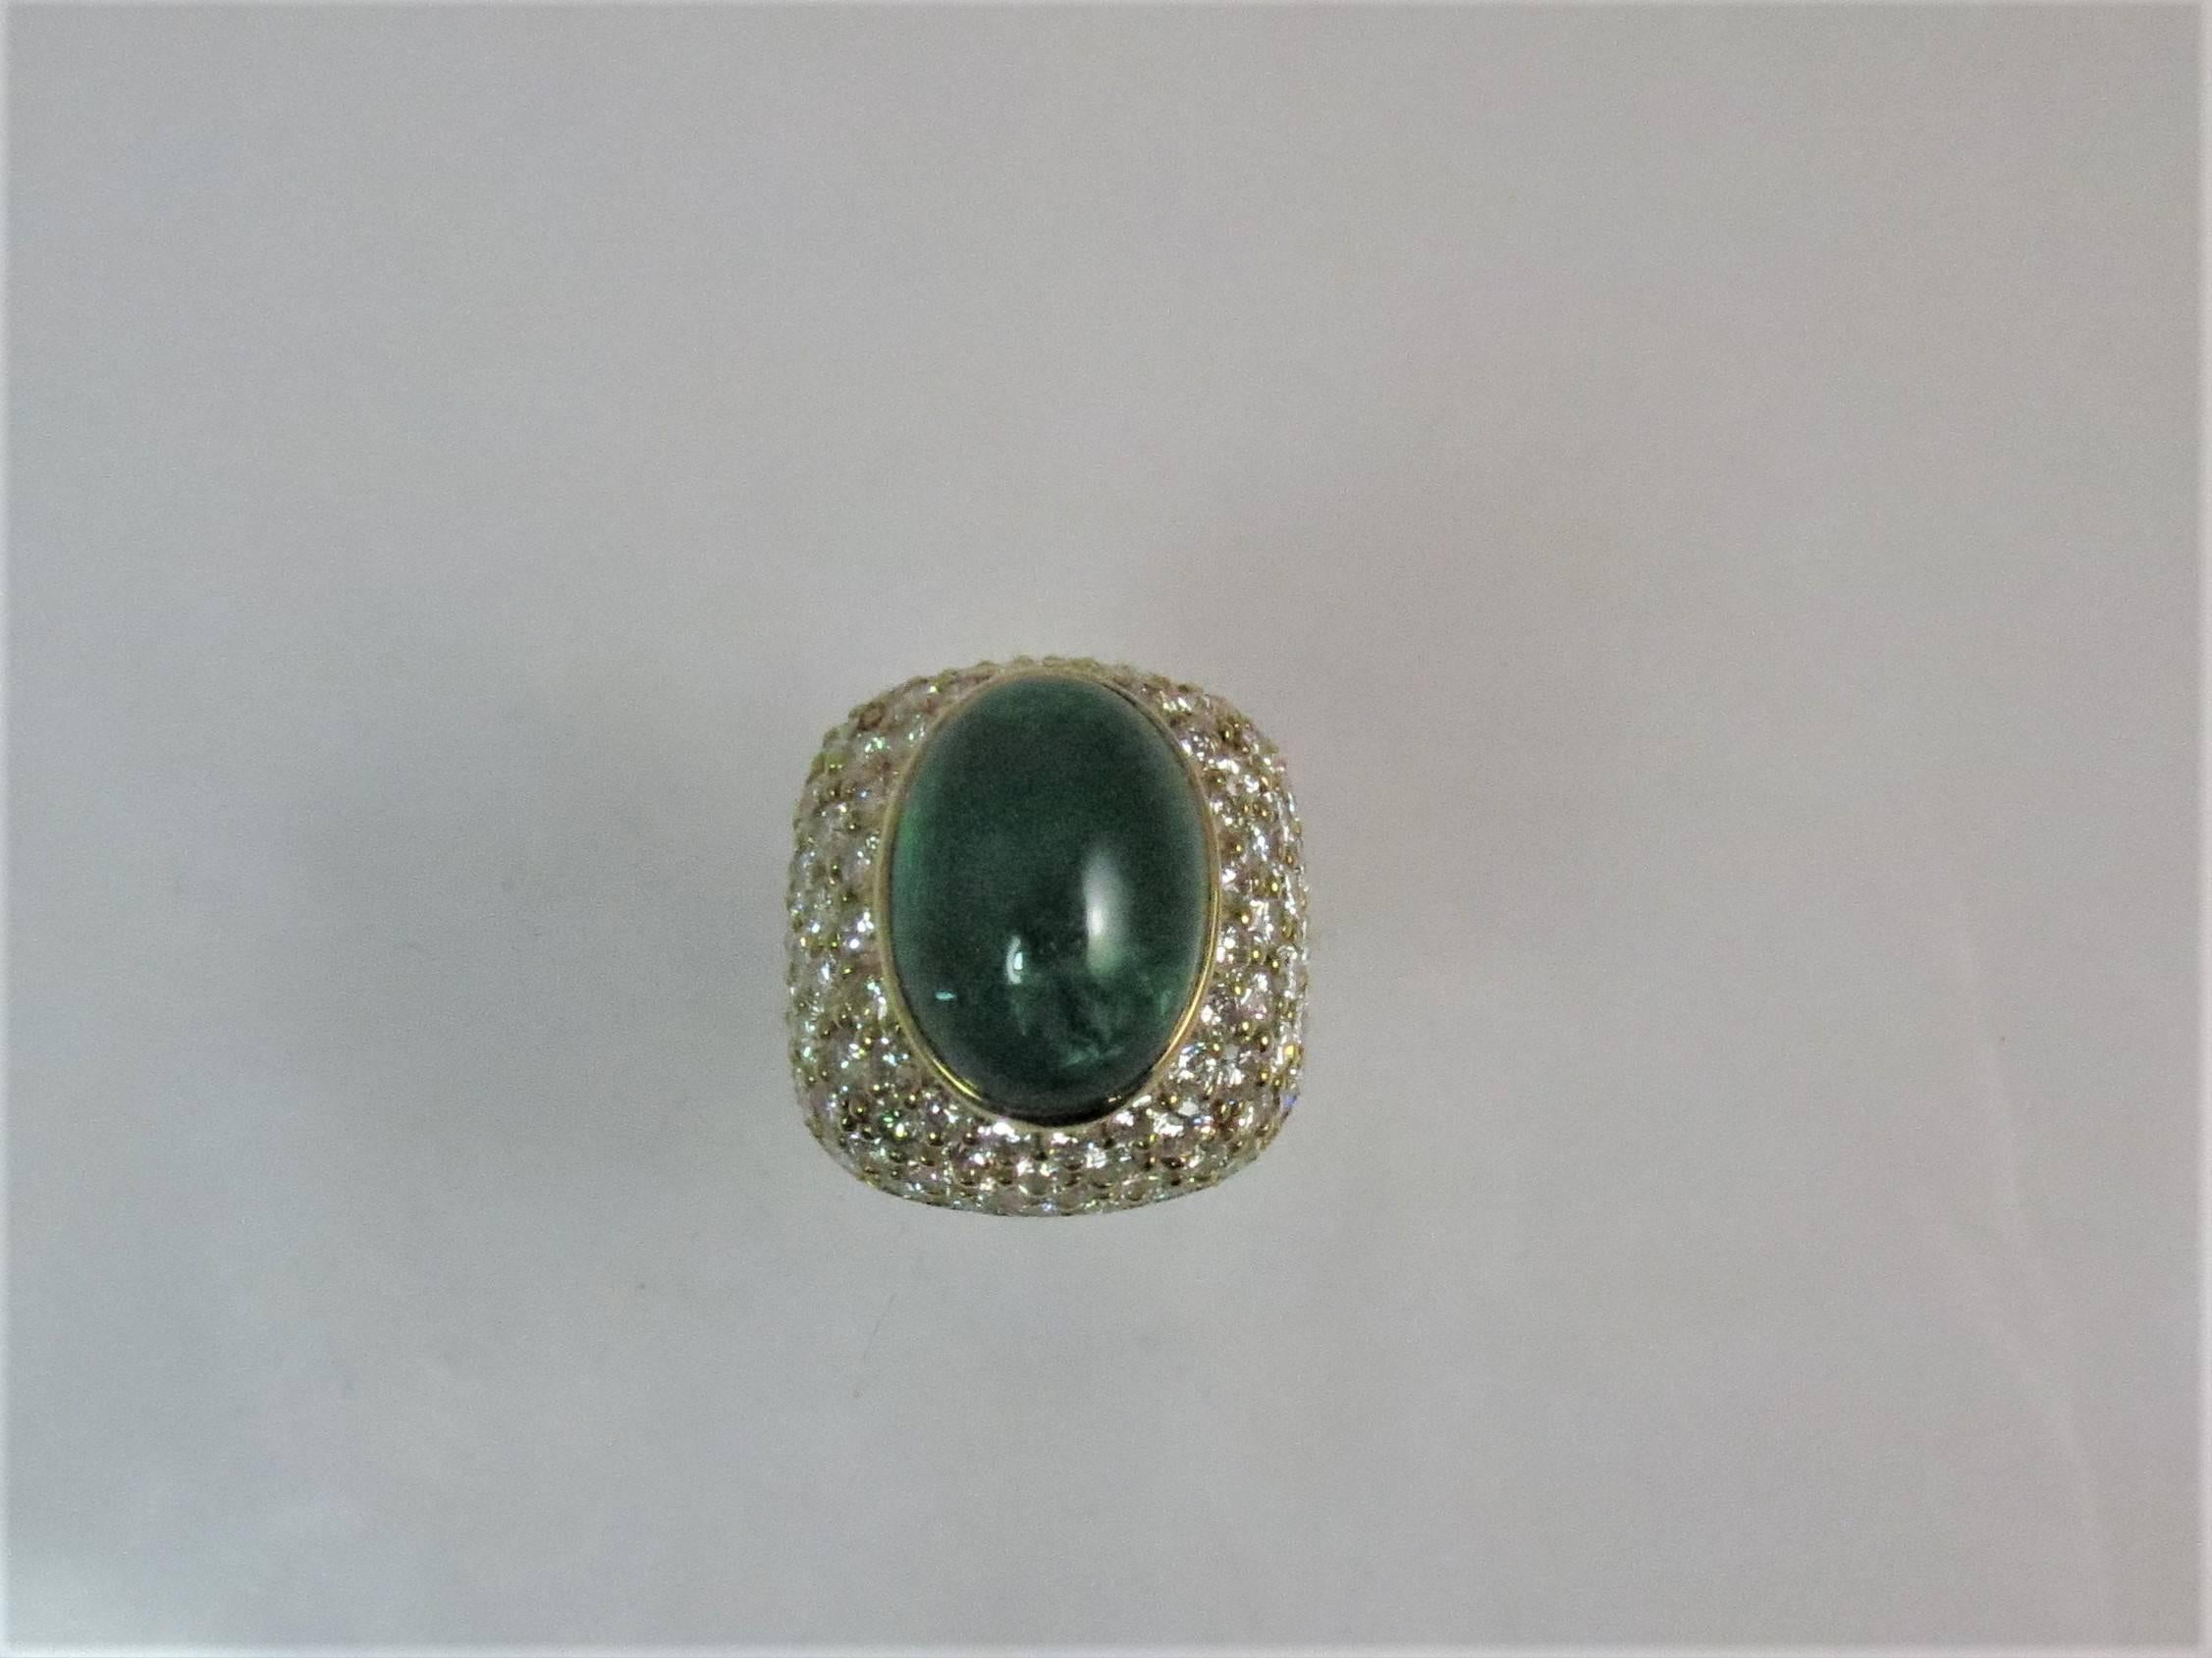 Contemporary Montreaux 18 Karat Yellow Gold and Platinum Cabochon Emerald and Diamond Ring